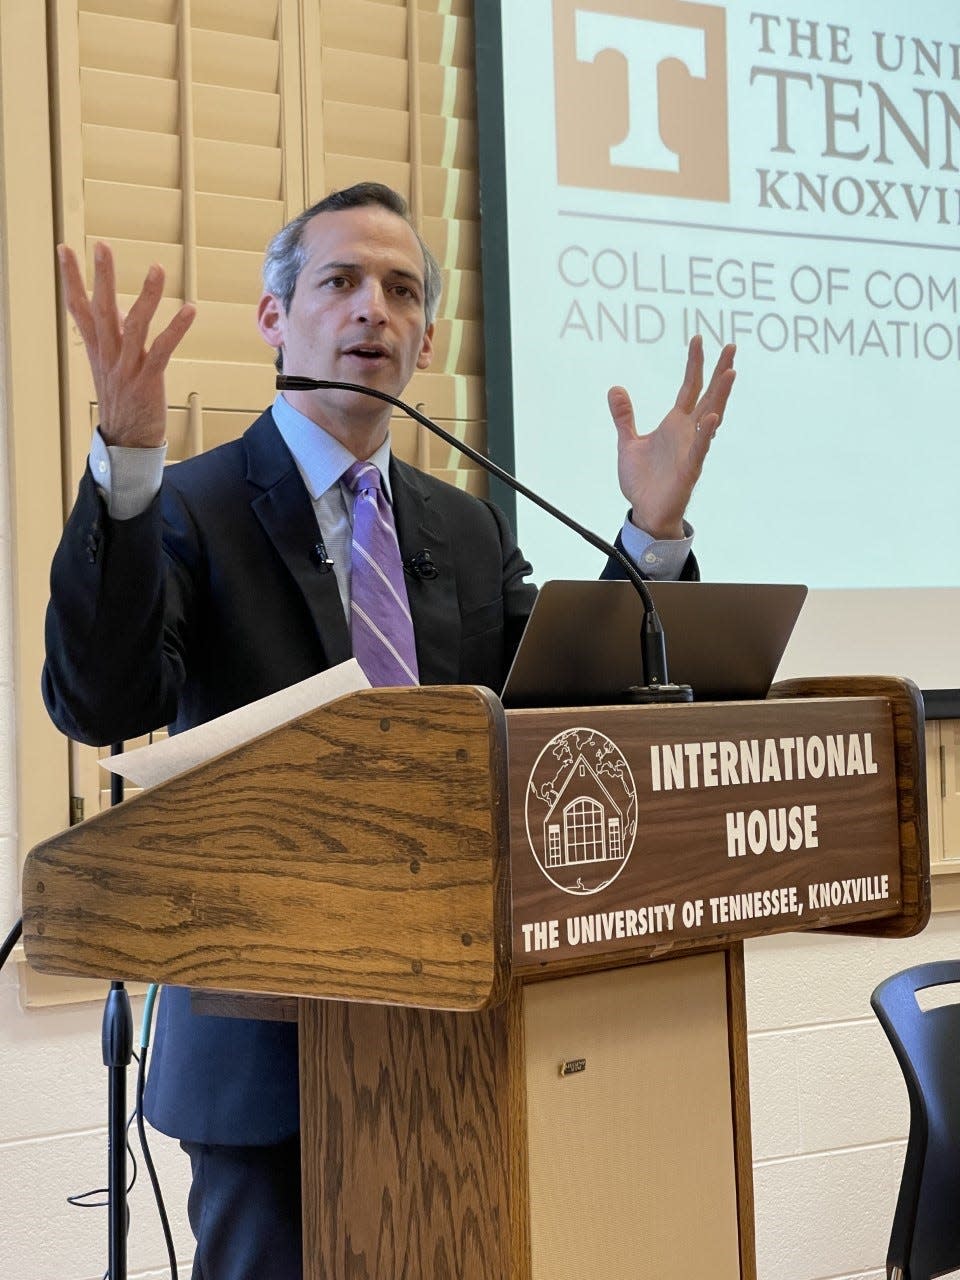 PBS "NewsHour" correspondent Nick Schifrin speaks April 28 at the University of Tennessee at Knoxville for an international reporting symposium related to the war in Ukraine.